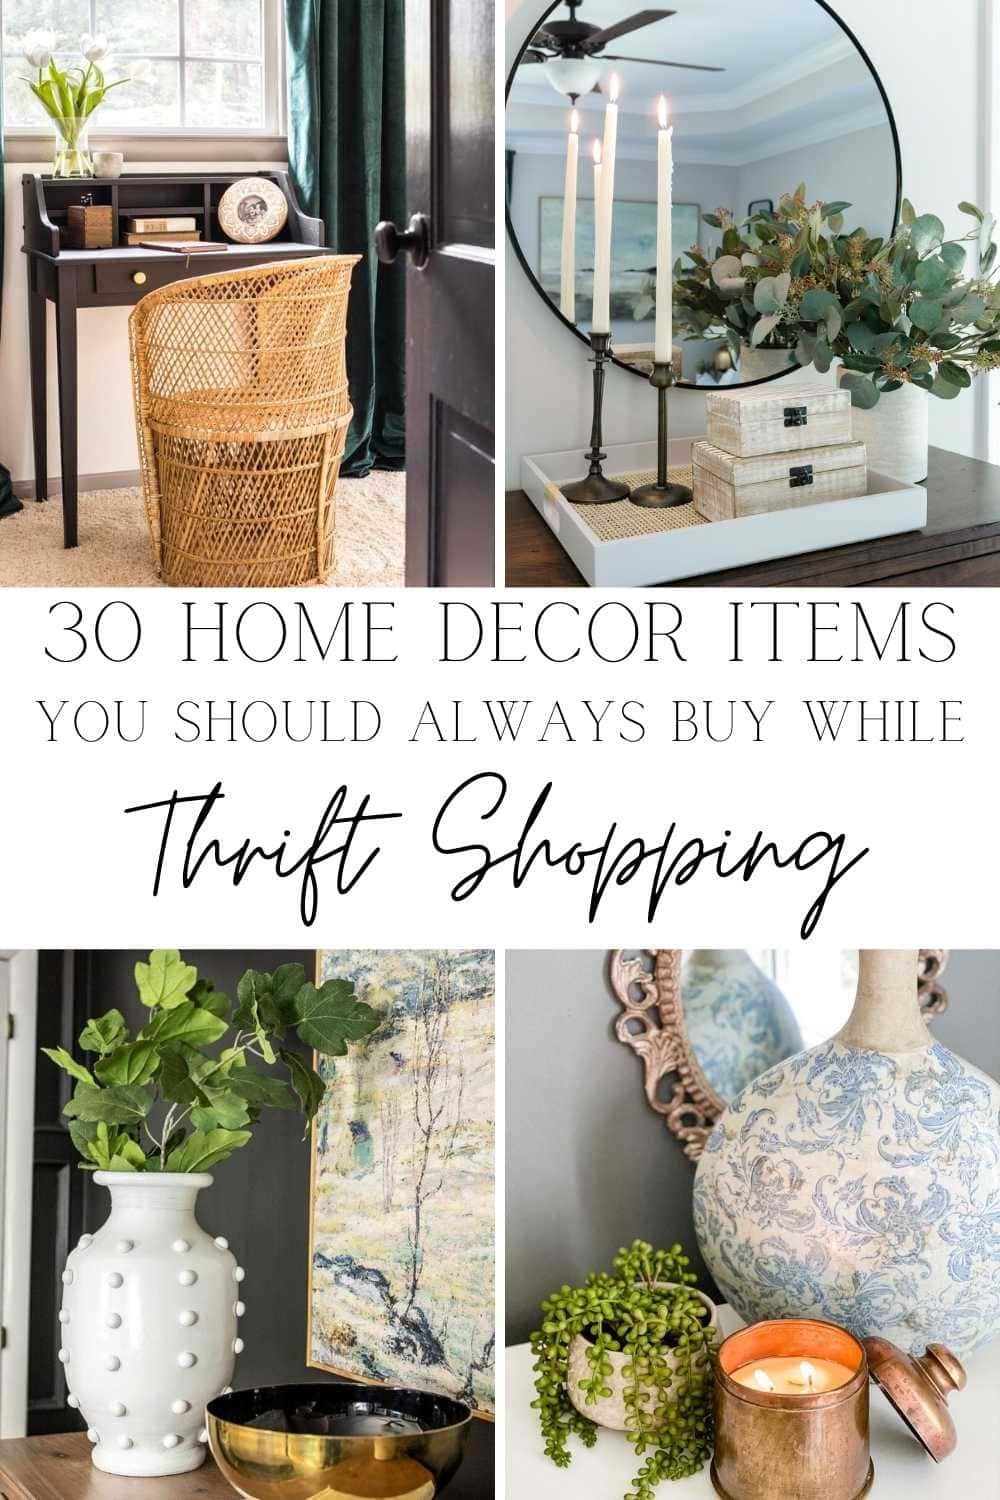 A round-up of 30 of the most common items to buy while thrift shopping that can be transformed into home decor using a few simple changes.